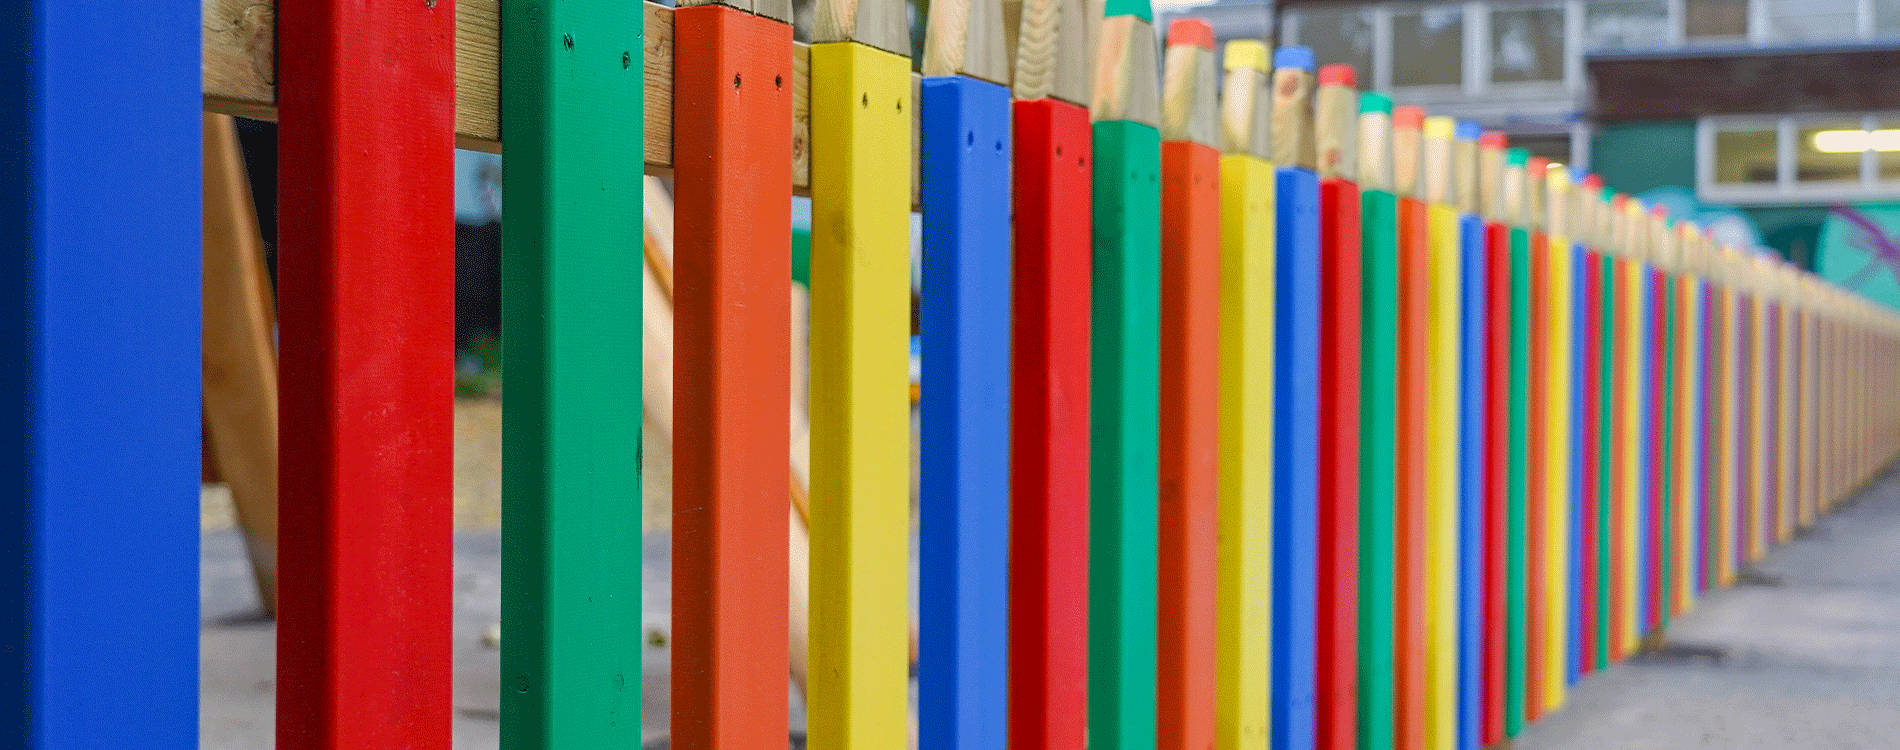 School Playground fencing in form of brightly coloured pencils